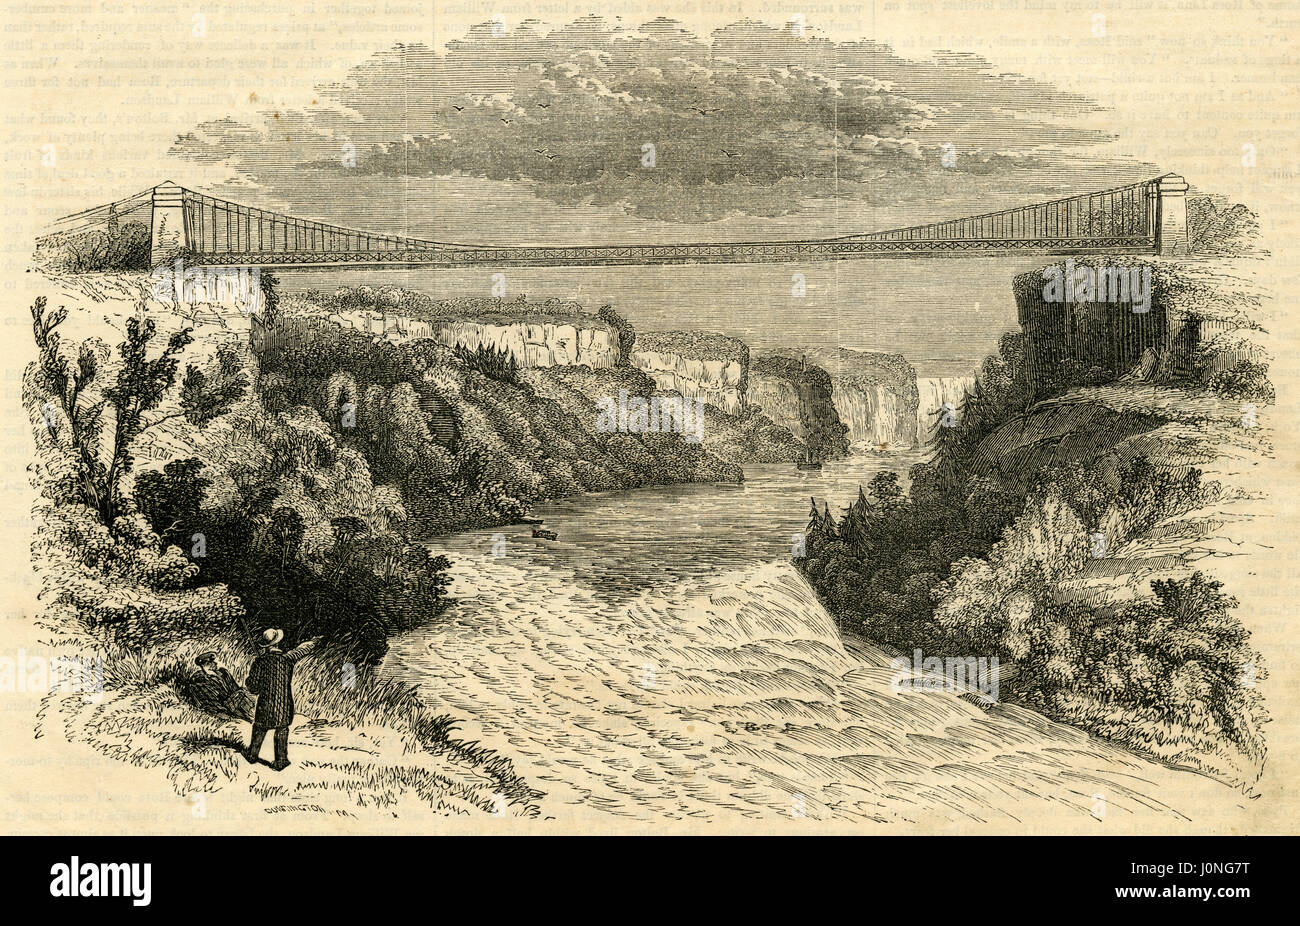 Antique 1854 engraving, 'View of the Suspension Bridge, Niagara.' The Niagara Falls Suspension Bridge, which stood from 1855 to 1897 across the Niagara River, was the world's first working railway suspension bridge. It spanned 825 feet (251 m) and stood 2.5 miles (4.0 km) downstream of Niagara Falls, where it connected Niagara Falls, Ontario, to Niagara Falls, New York. SOURCE: ORIGINAL ENGRAVING. Stock Photo